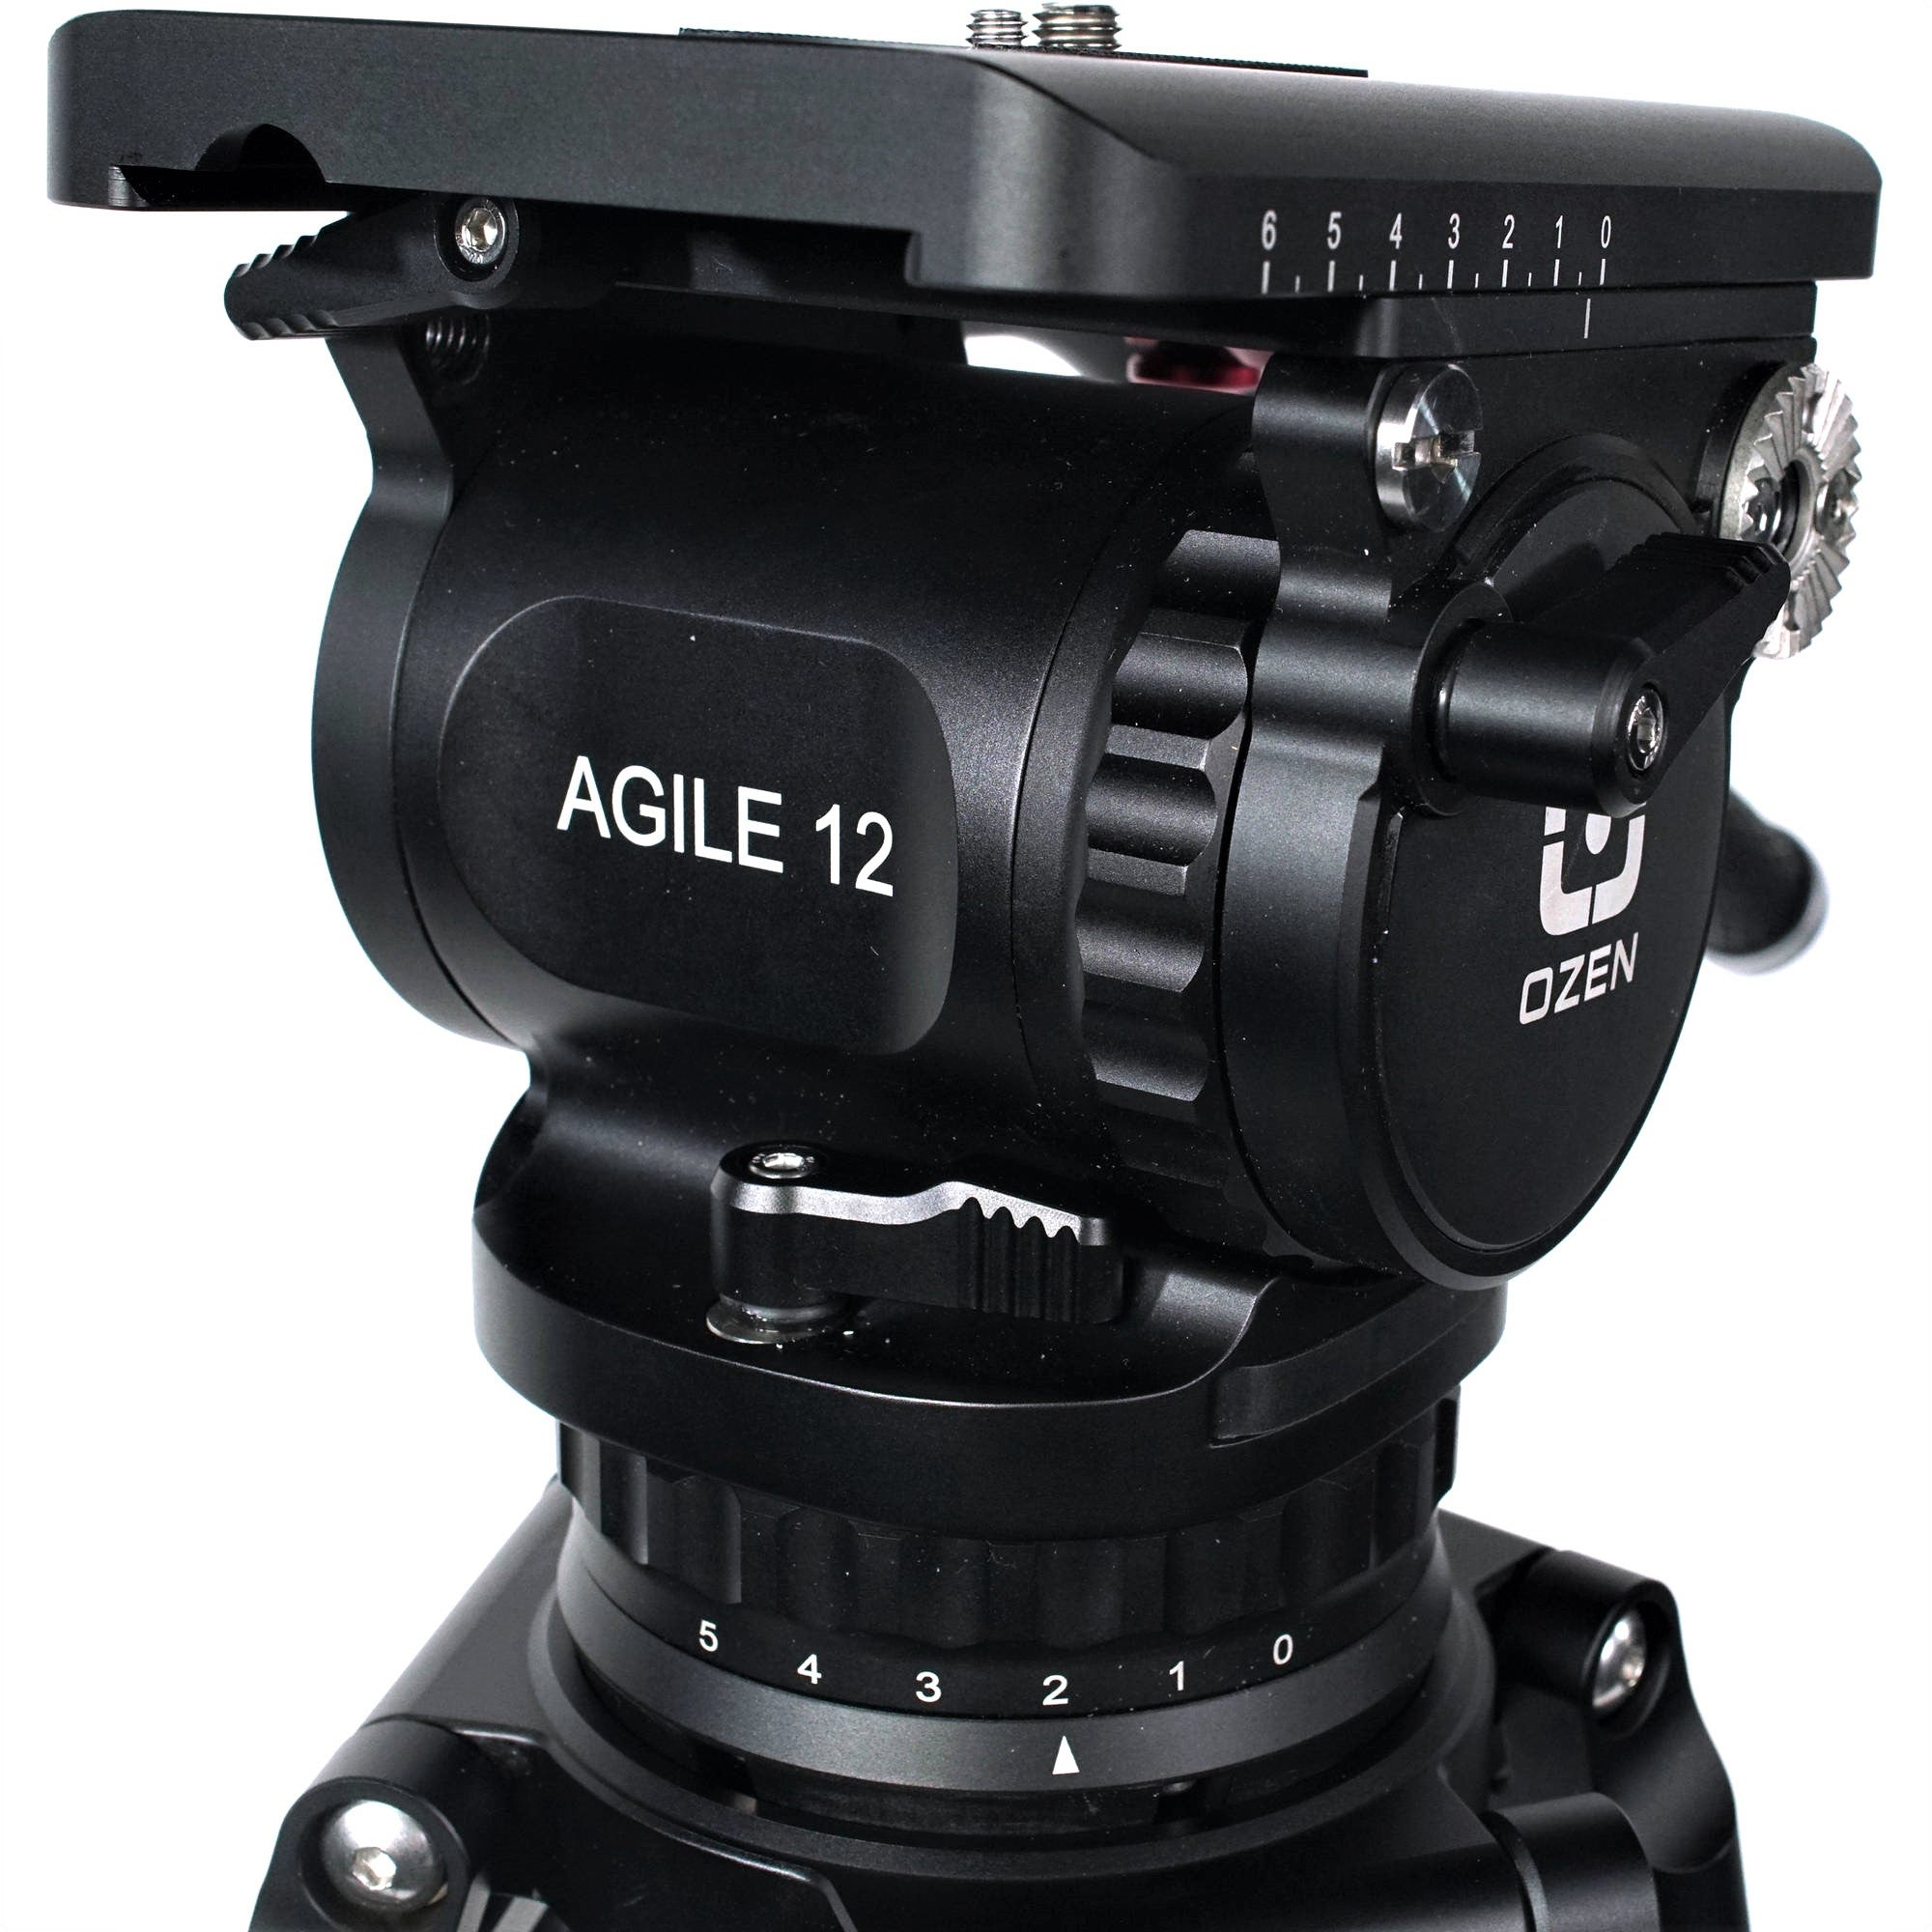 OZEN Agile 12 Fluid Head in a Full Close-Up View